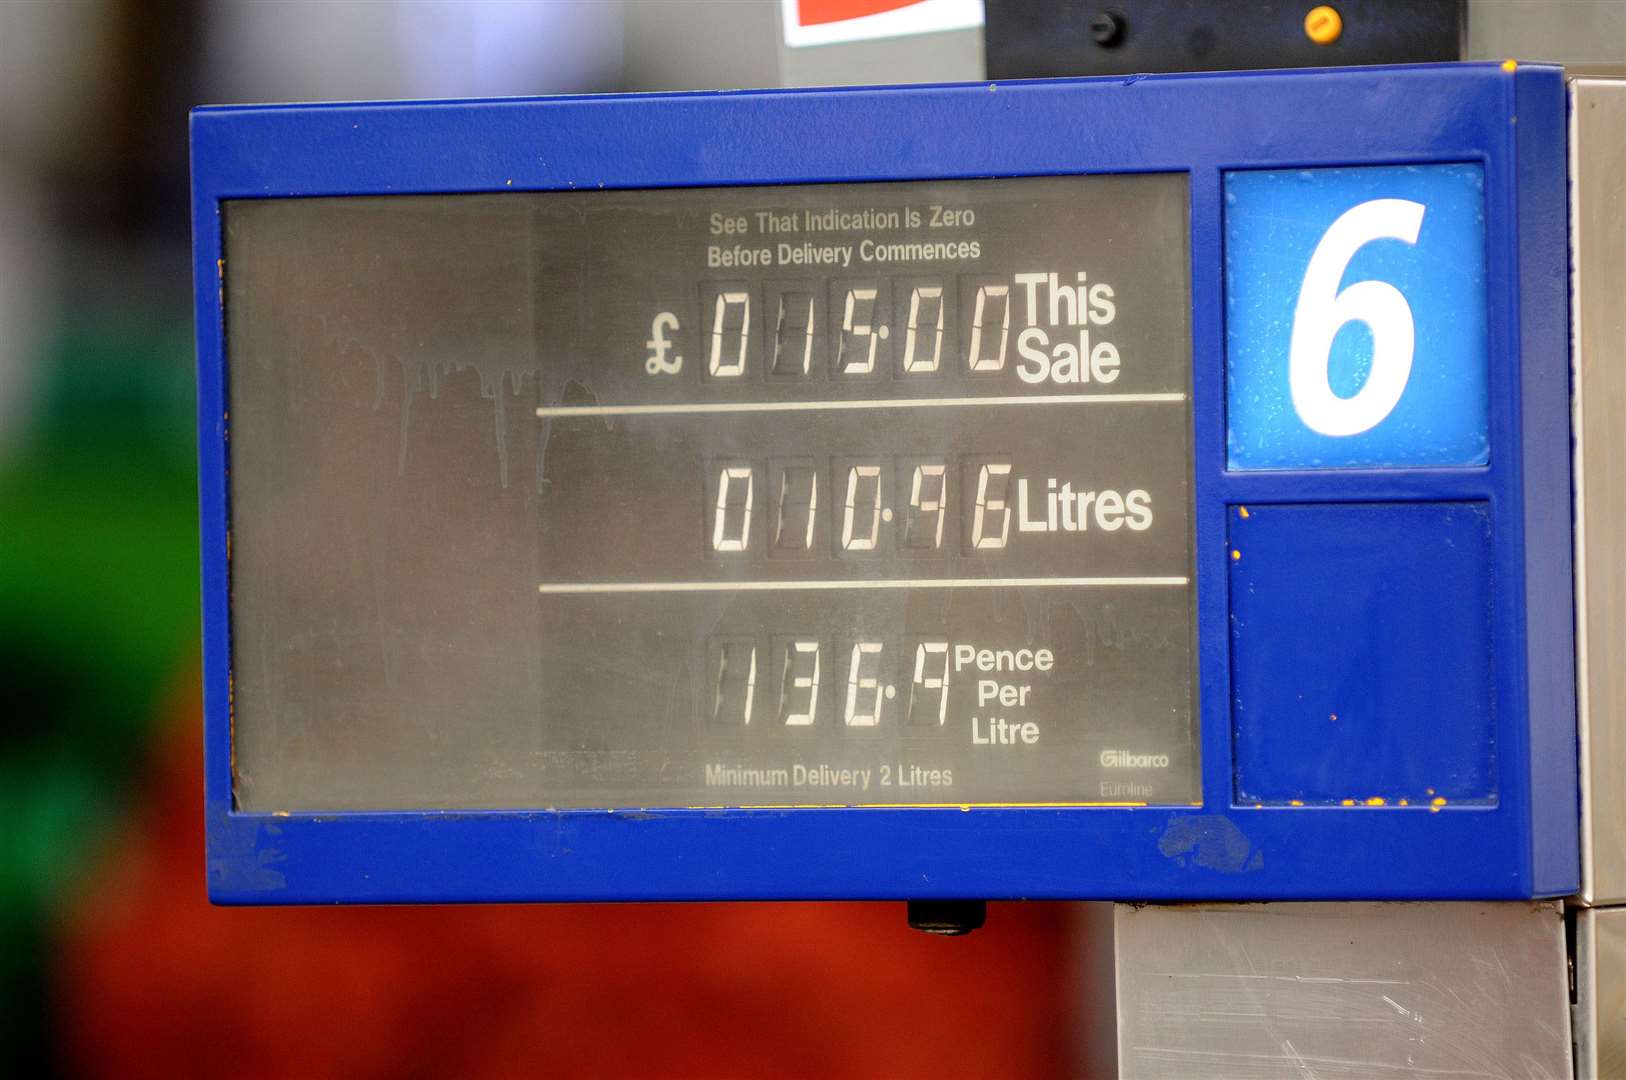 The cost of petrol for those that can't use the new E10 fuel will go up